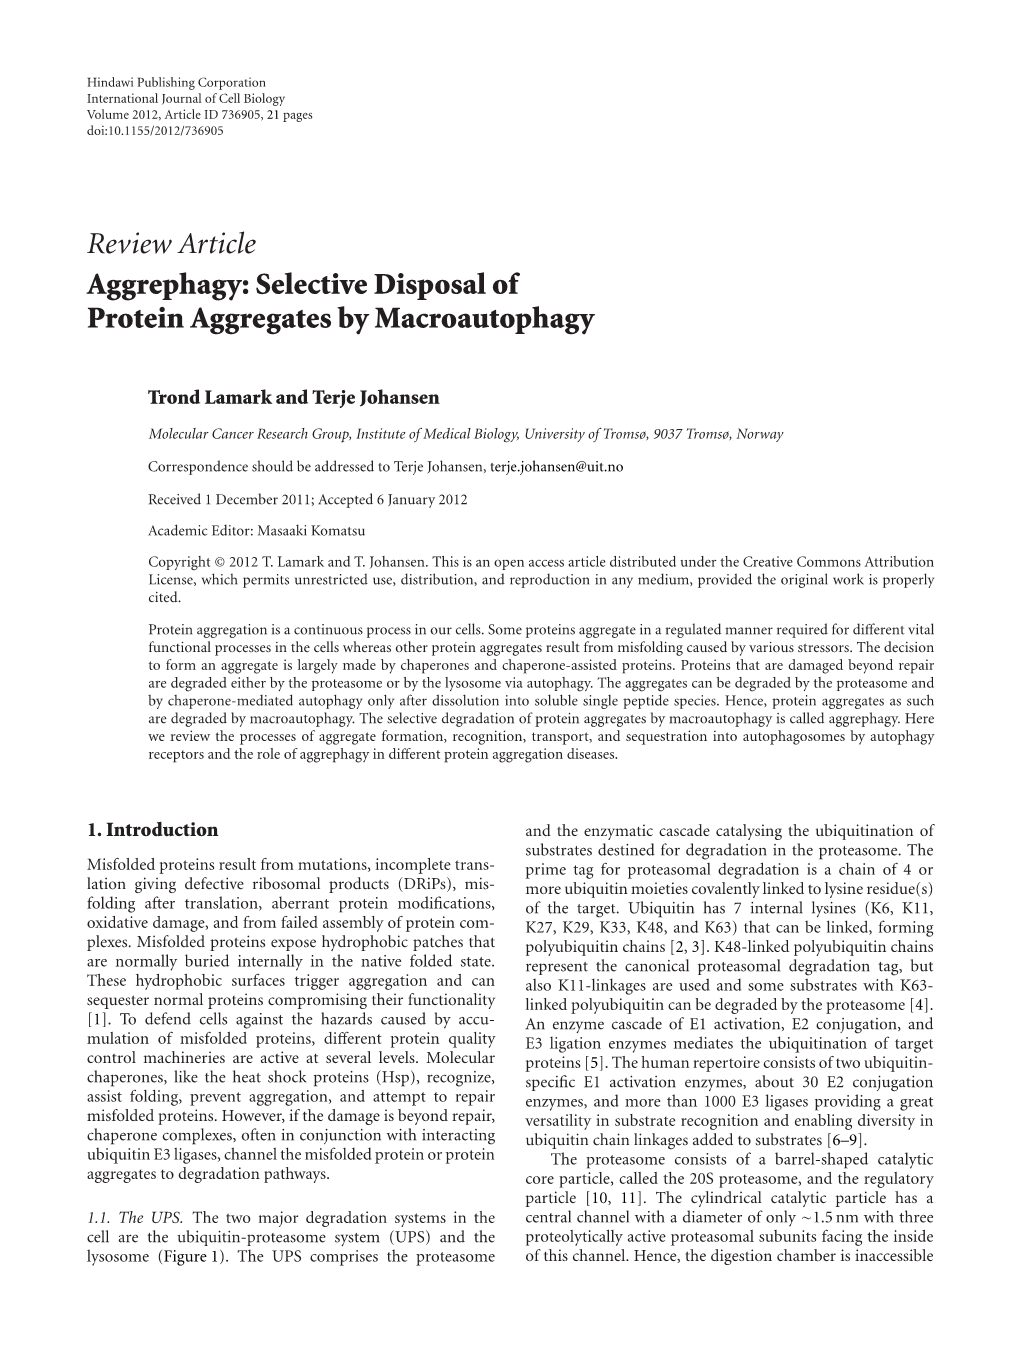 Review Article Aggrephagy: Selective Disposal of Protein Aggregates by Macroautophagy